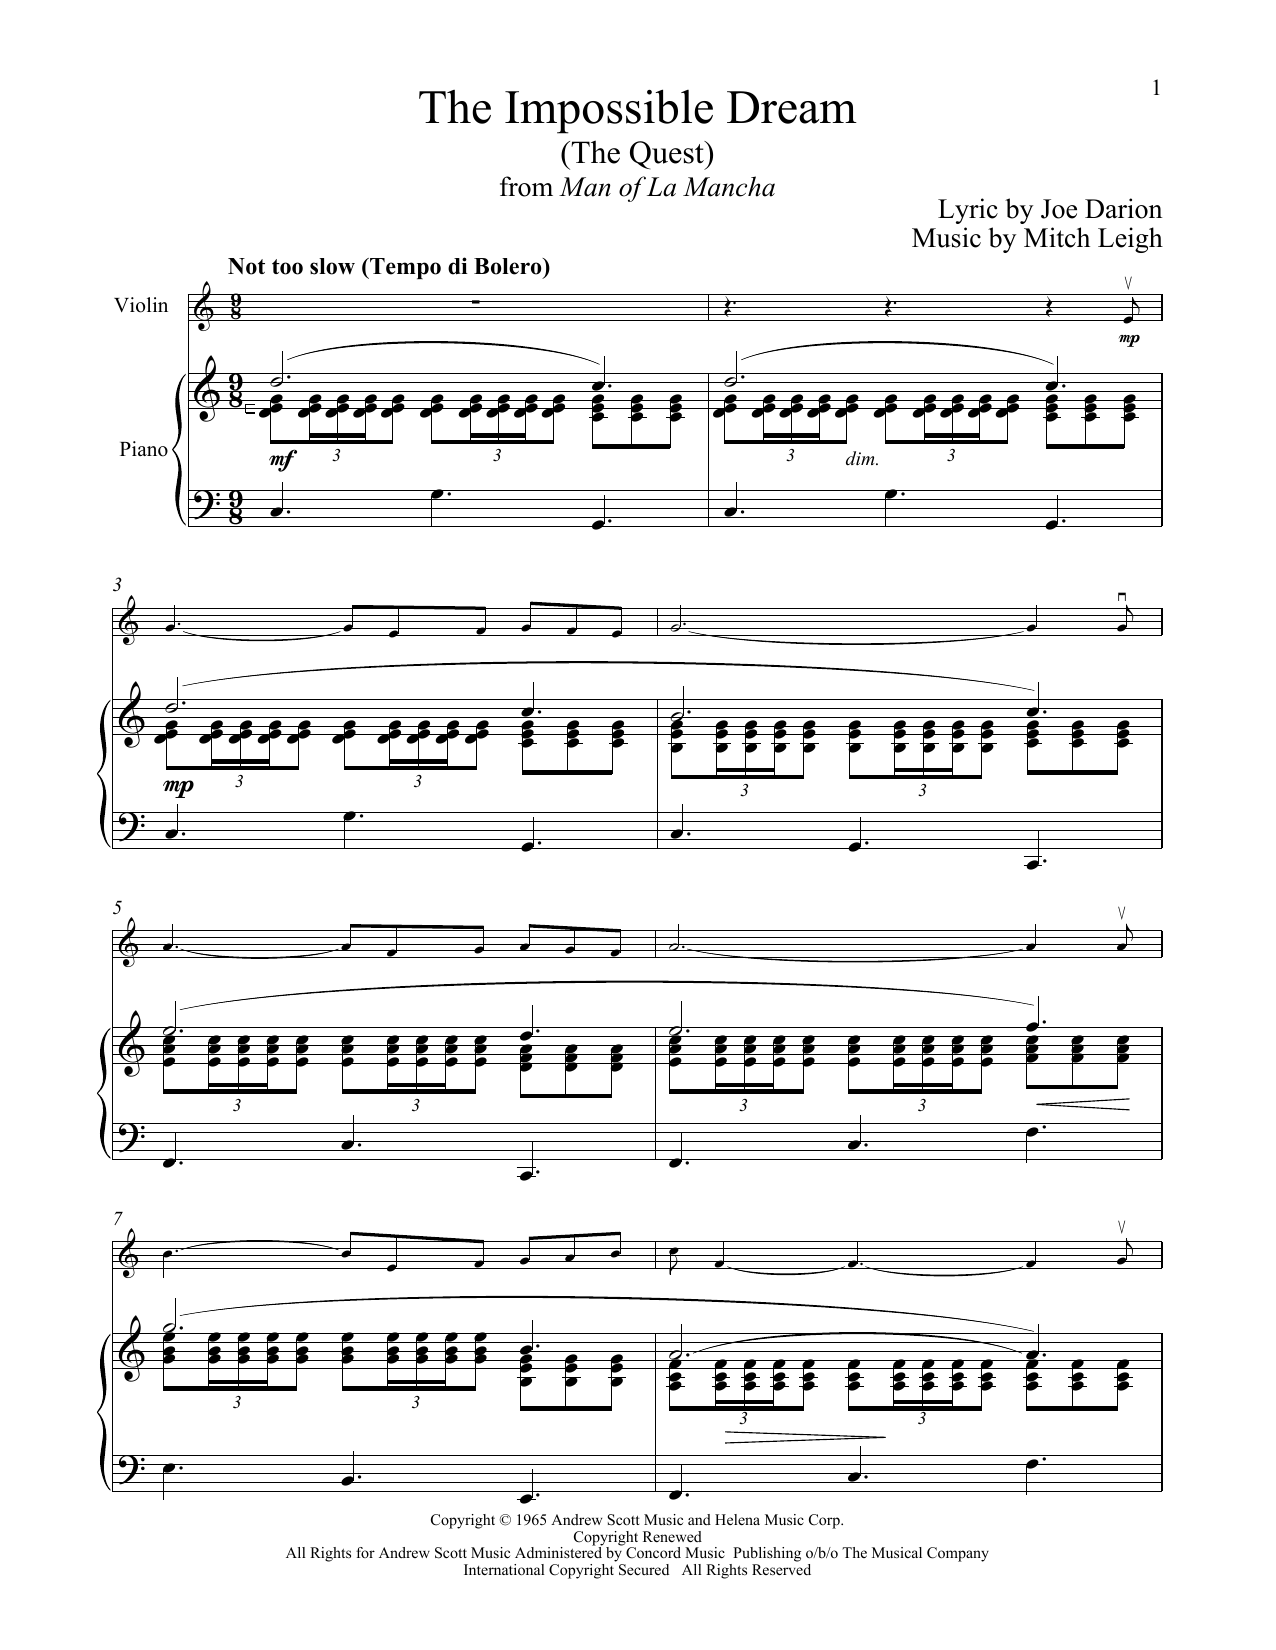 Download Mitch Leigh The Impossible Dream (The Quest) (from Sheet Music